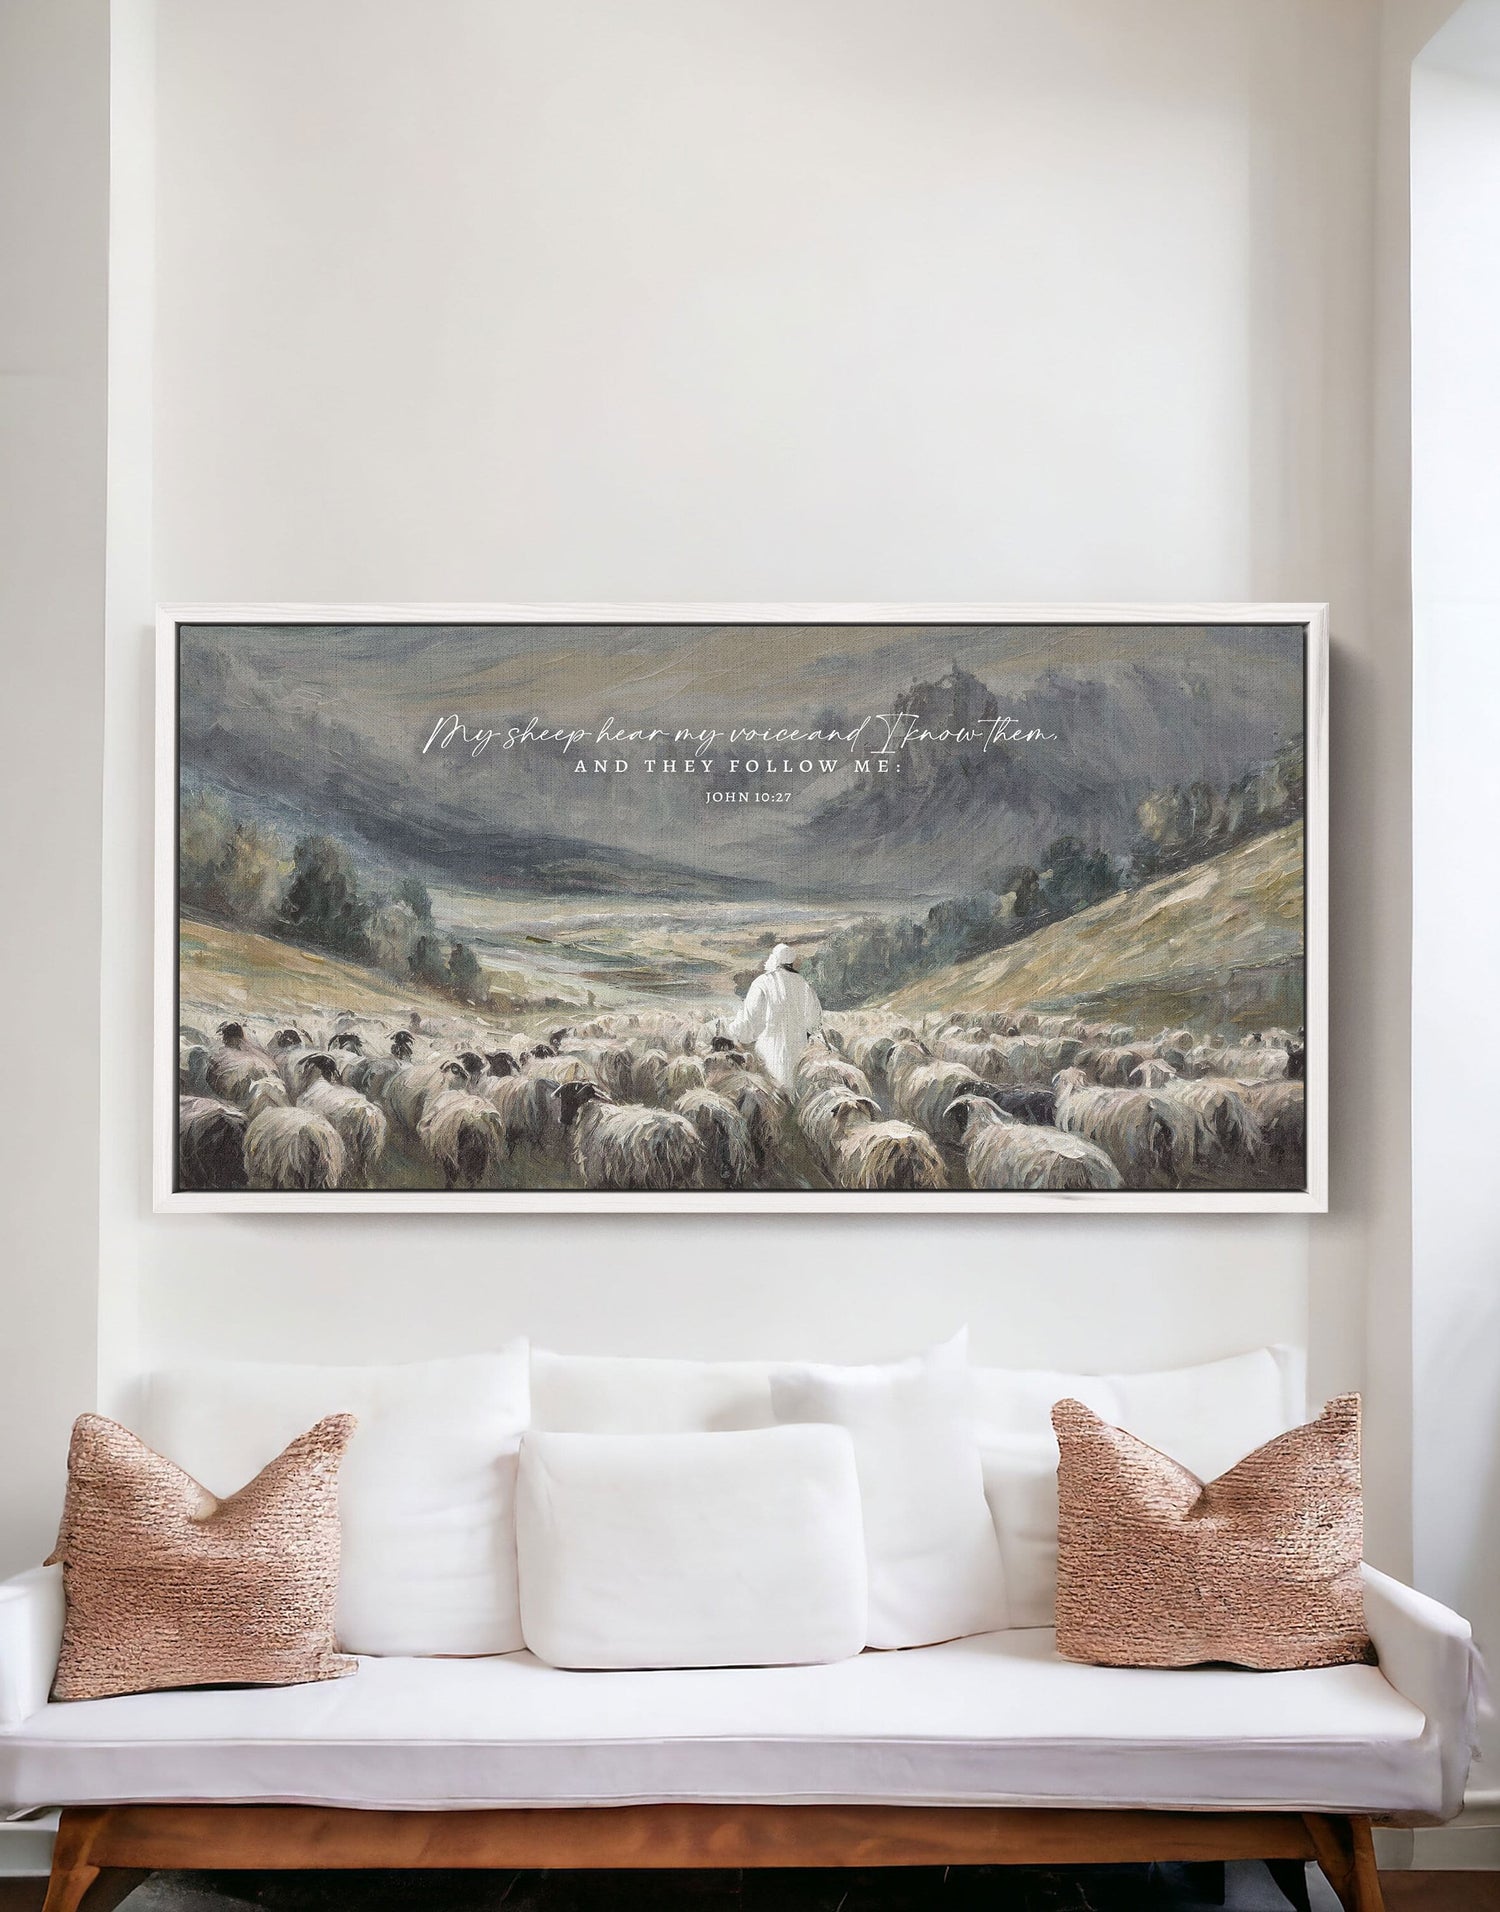 Christian Wall Art | My Sheep Know My Voice, Jesus leads the Sheep oil Painting Print on Canvas Wall Art | John 10:27 Scripture Wall Art